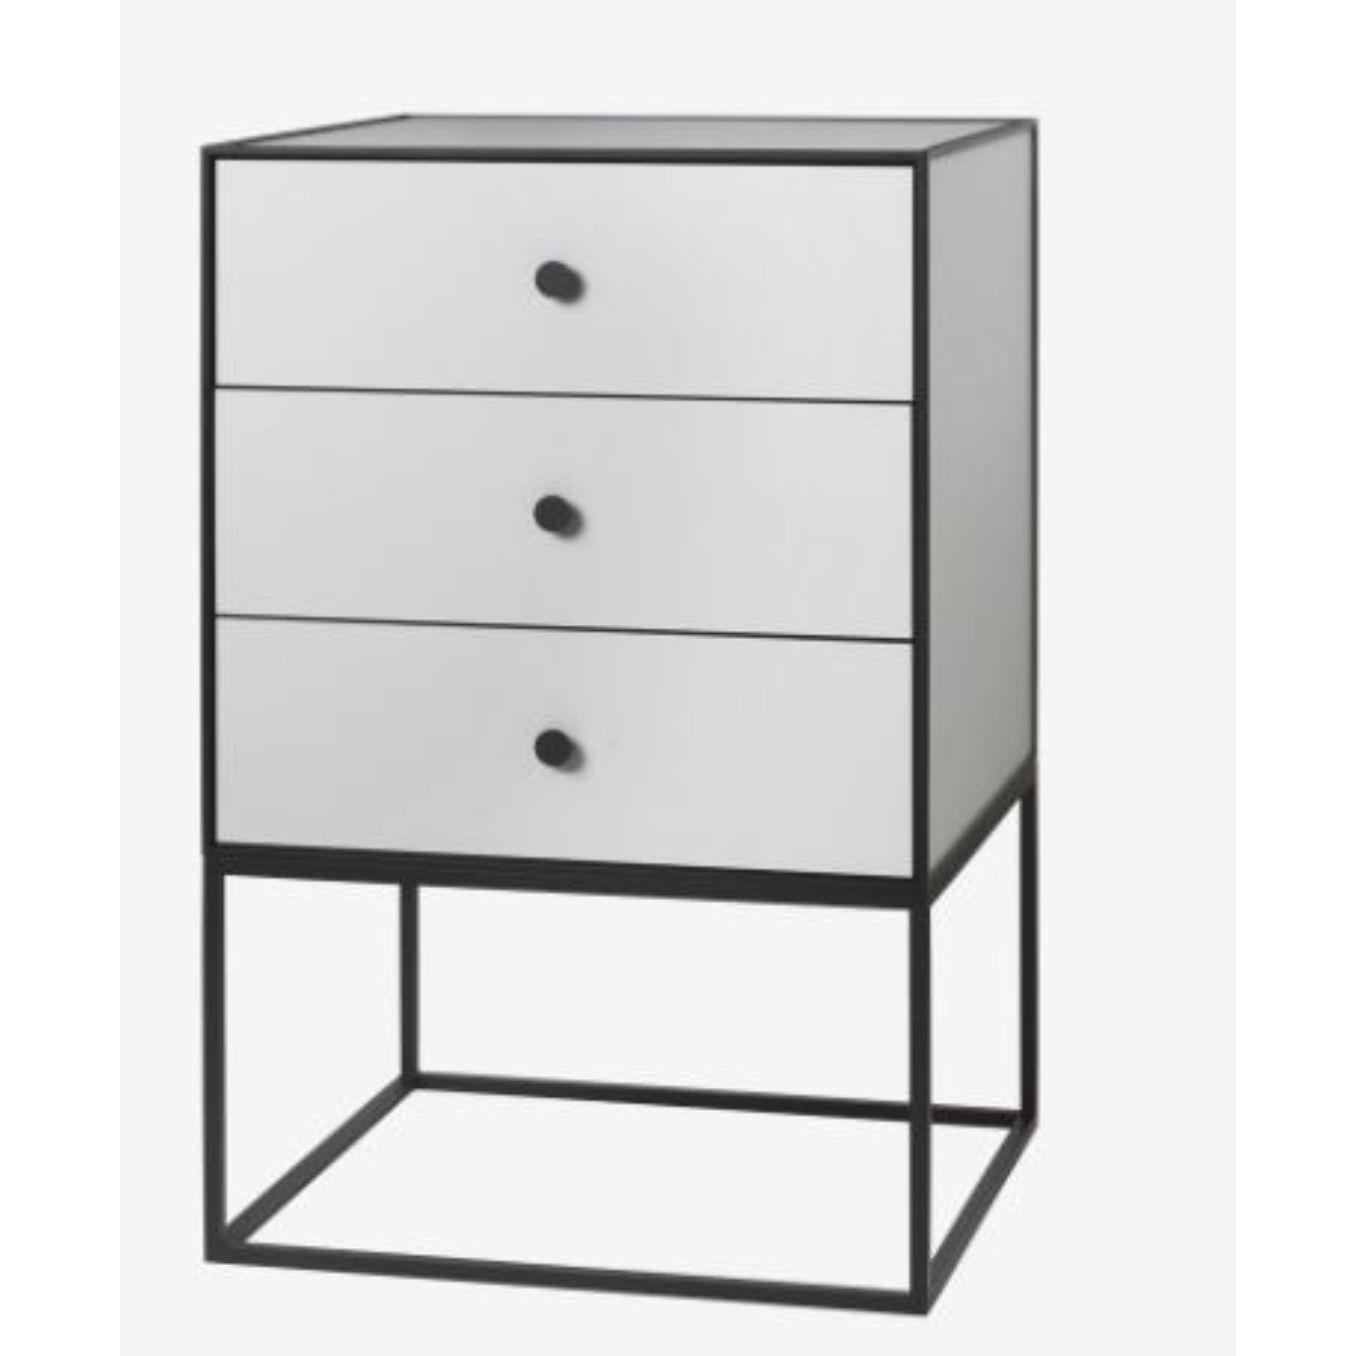 49 light grey frame sideboard with 3 drawers by Lassen
Dimensions: D 49 x W 42 x H 77 cm 
Materials: finér, melamin, melamine, metal, veneer
Also available in different colours and dimensions.
Weight: 21 Kg

By Lassen is a Danish design brand